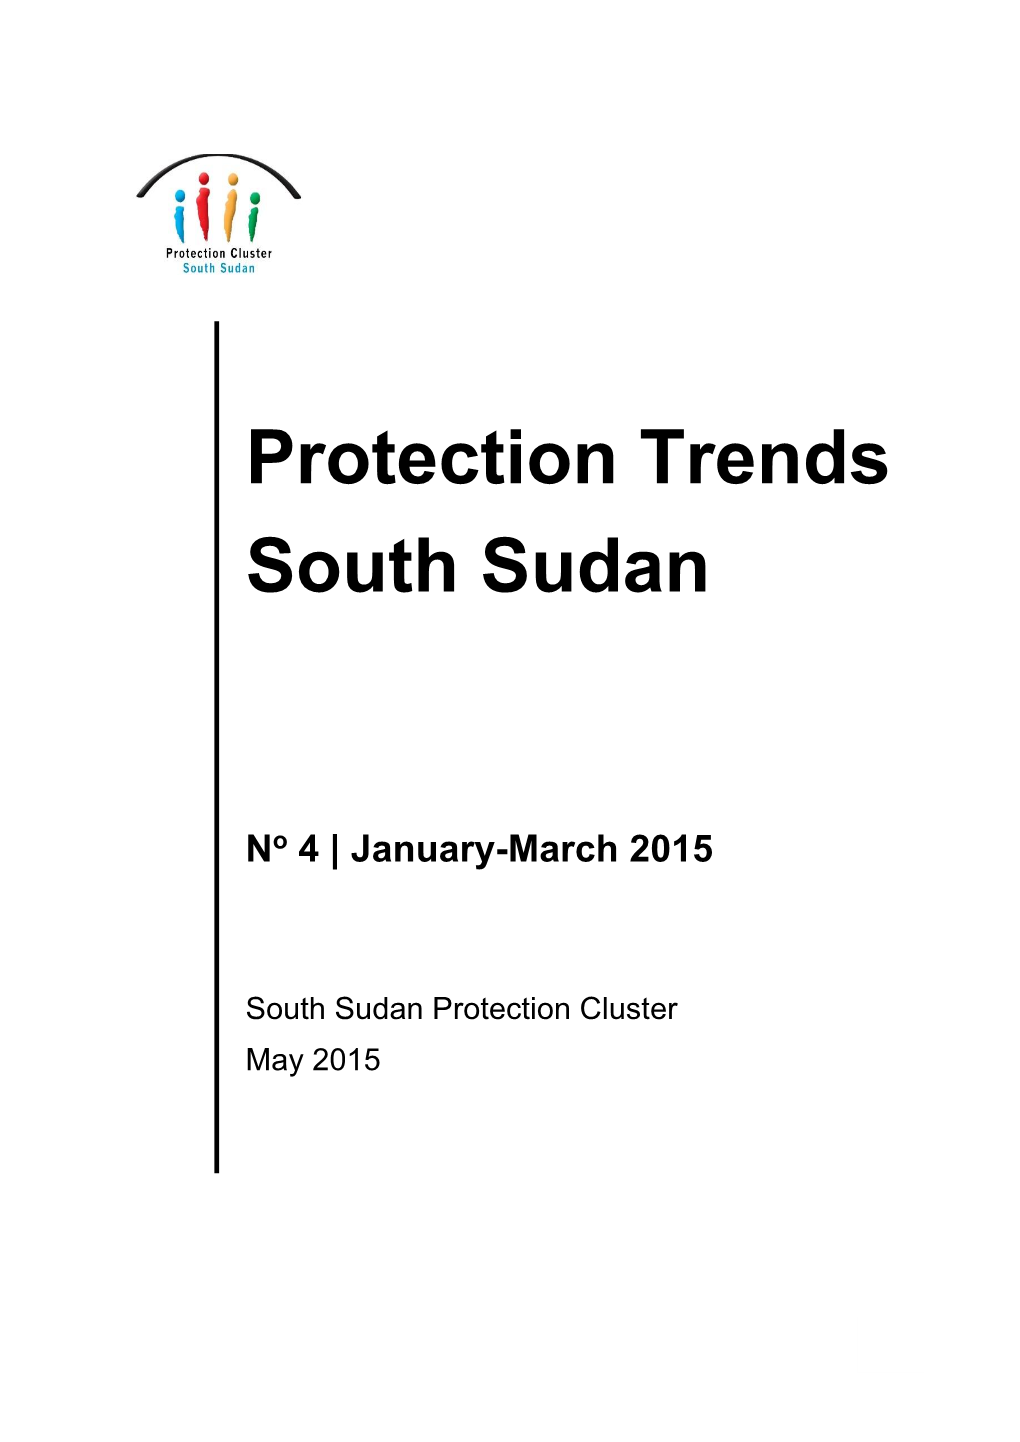 Protection Trends South Sudan